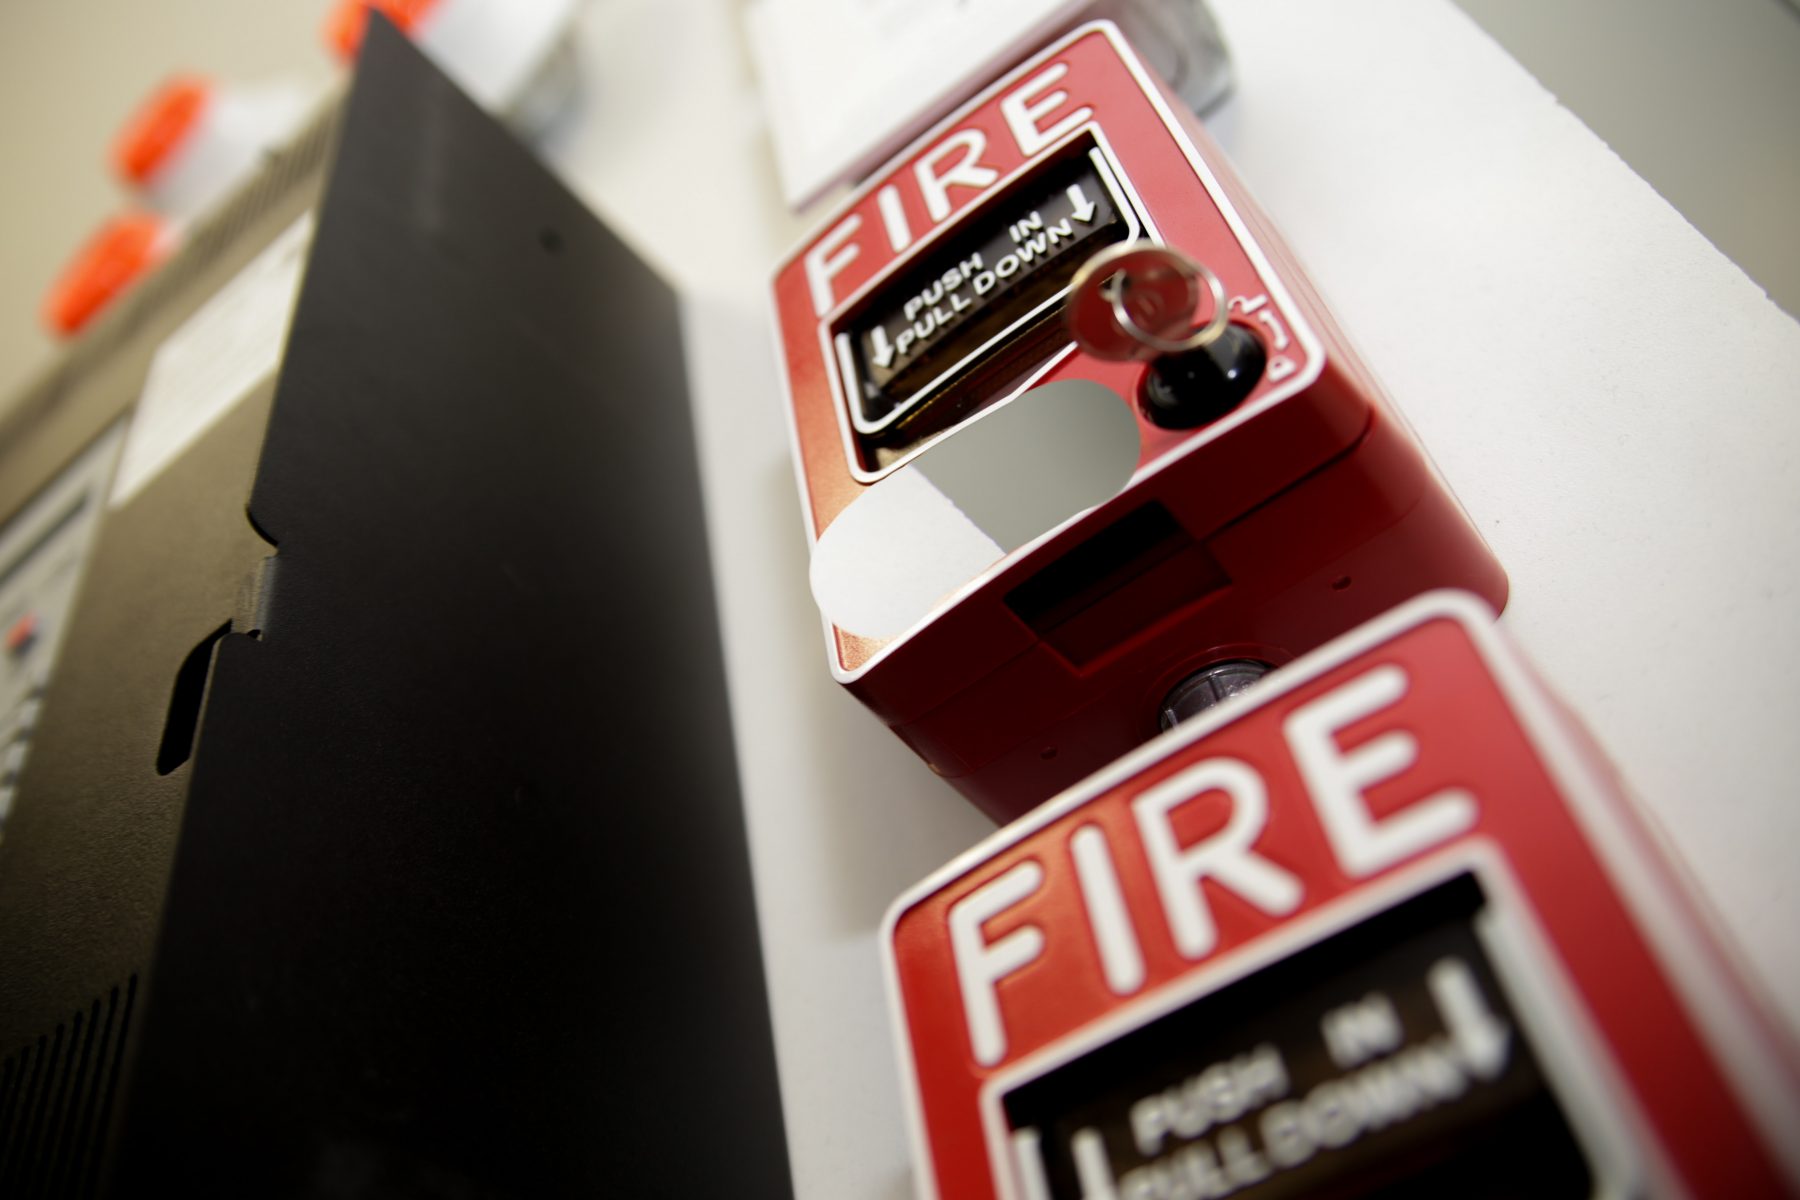 How often should fire alarms be tested?